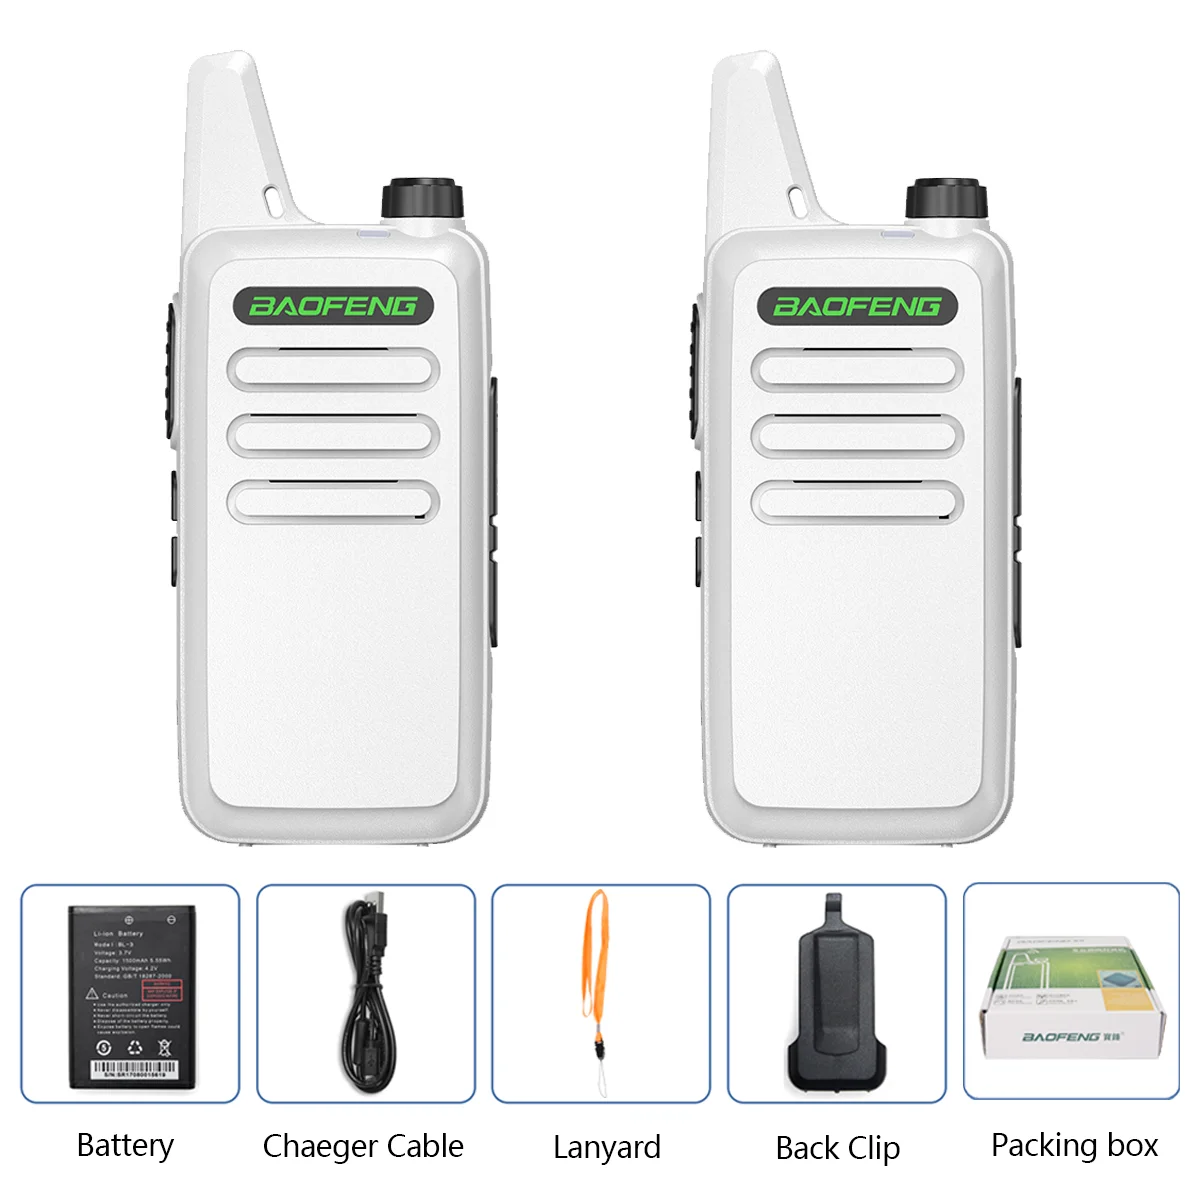  - 1/2Pack Baofeng BF-888S walkie talkie 888s UHF 400-470MHz 16Channel Portable two way radio with earpiece bf-888s transceiver T20